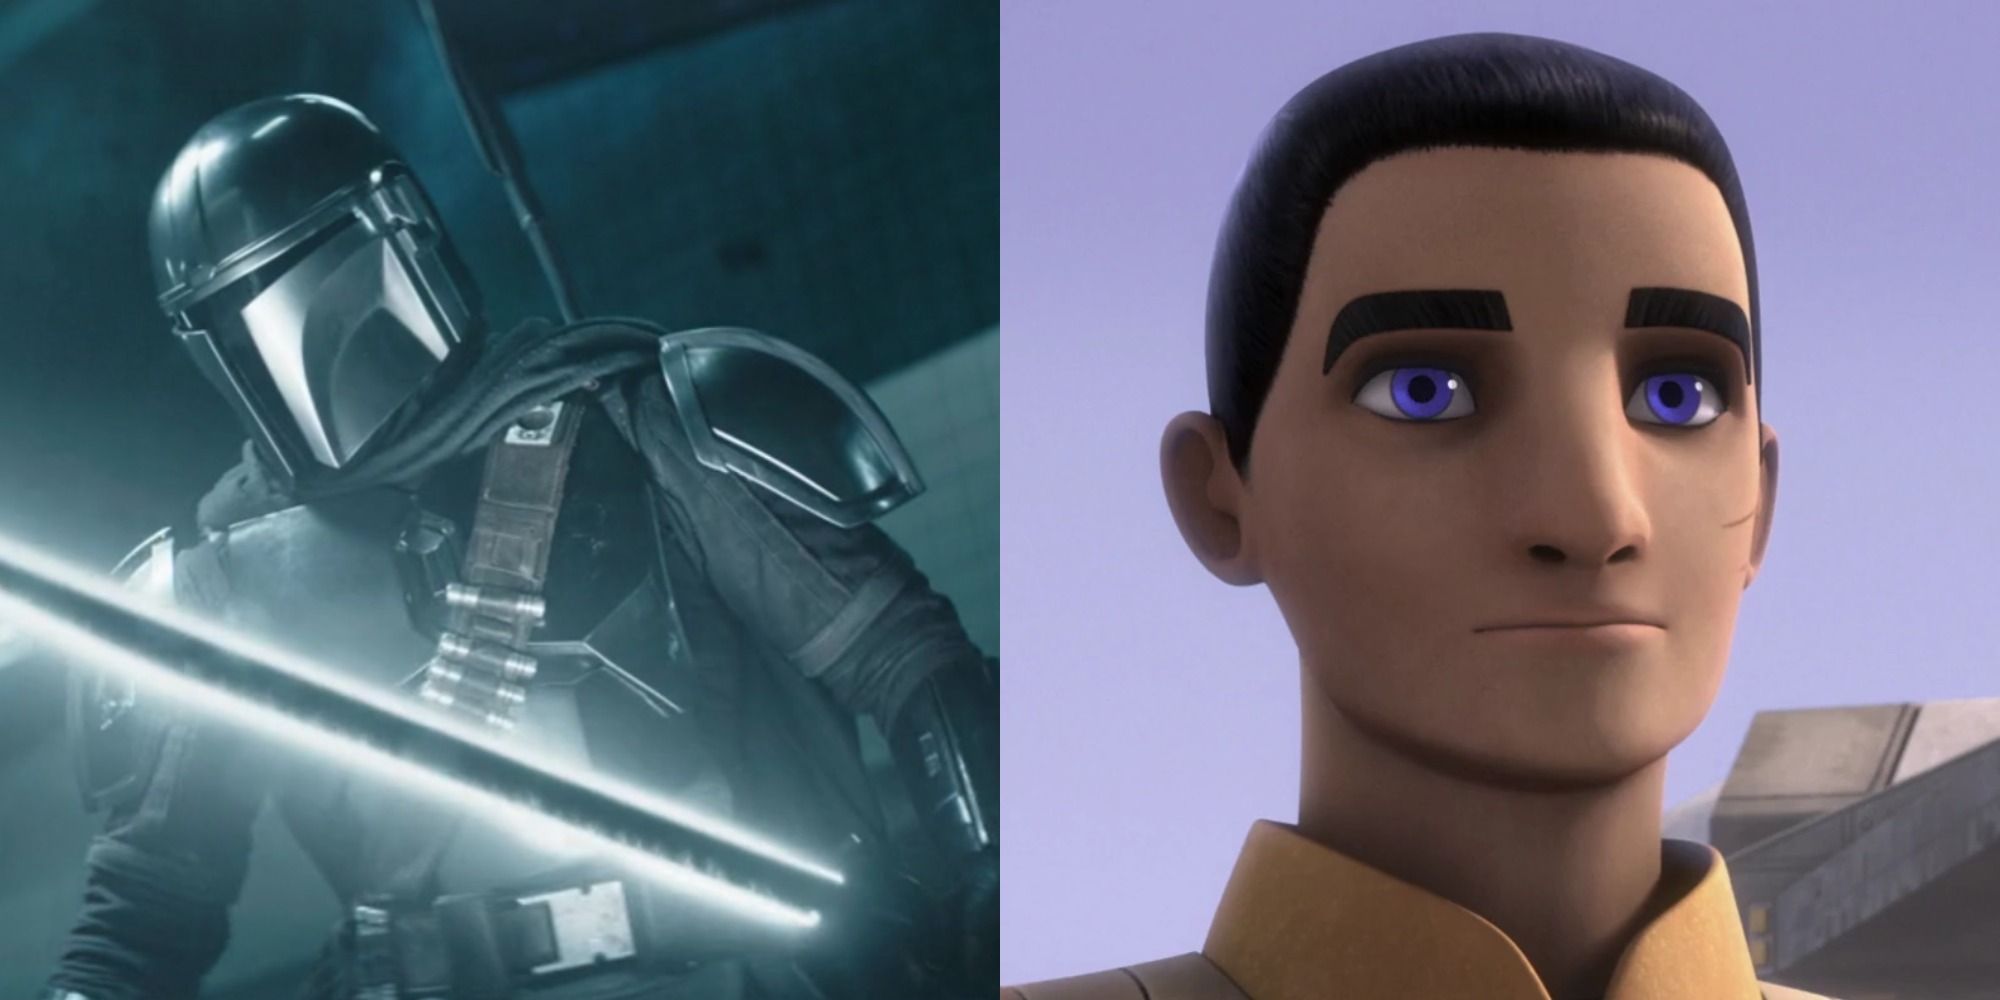 Split image showing the Mandalorian with the Darksaber and Ezra Bridger from Star Wars